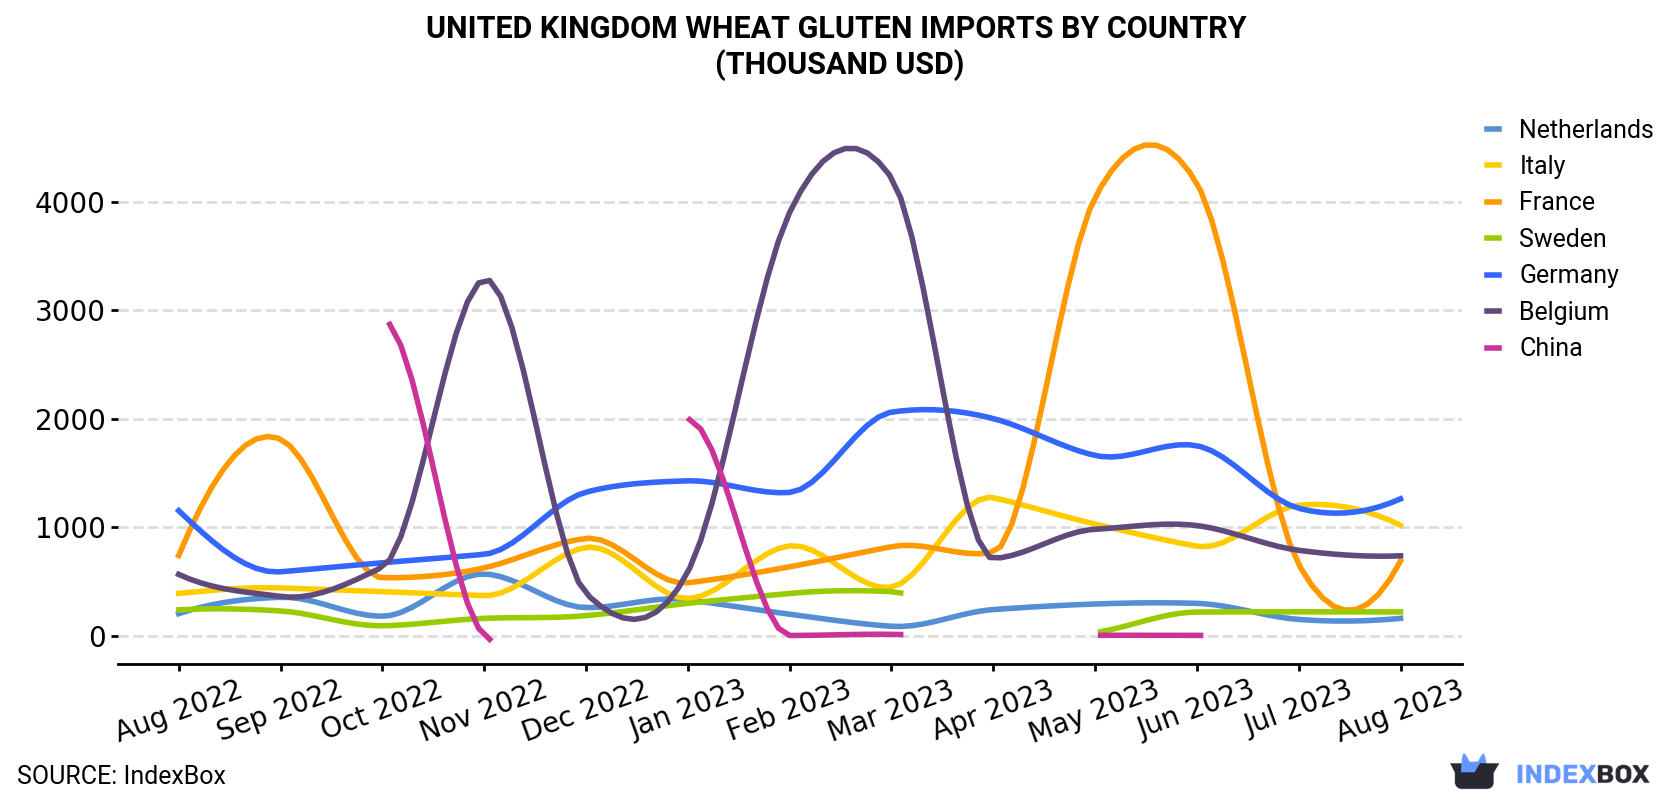 United Kingdom Wheat Gluten Imports By Country (Thousand USD)